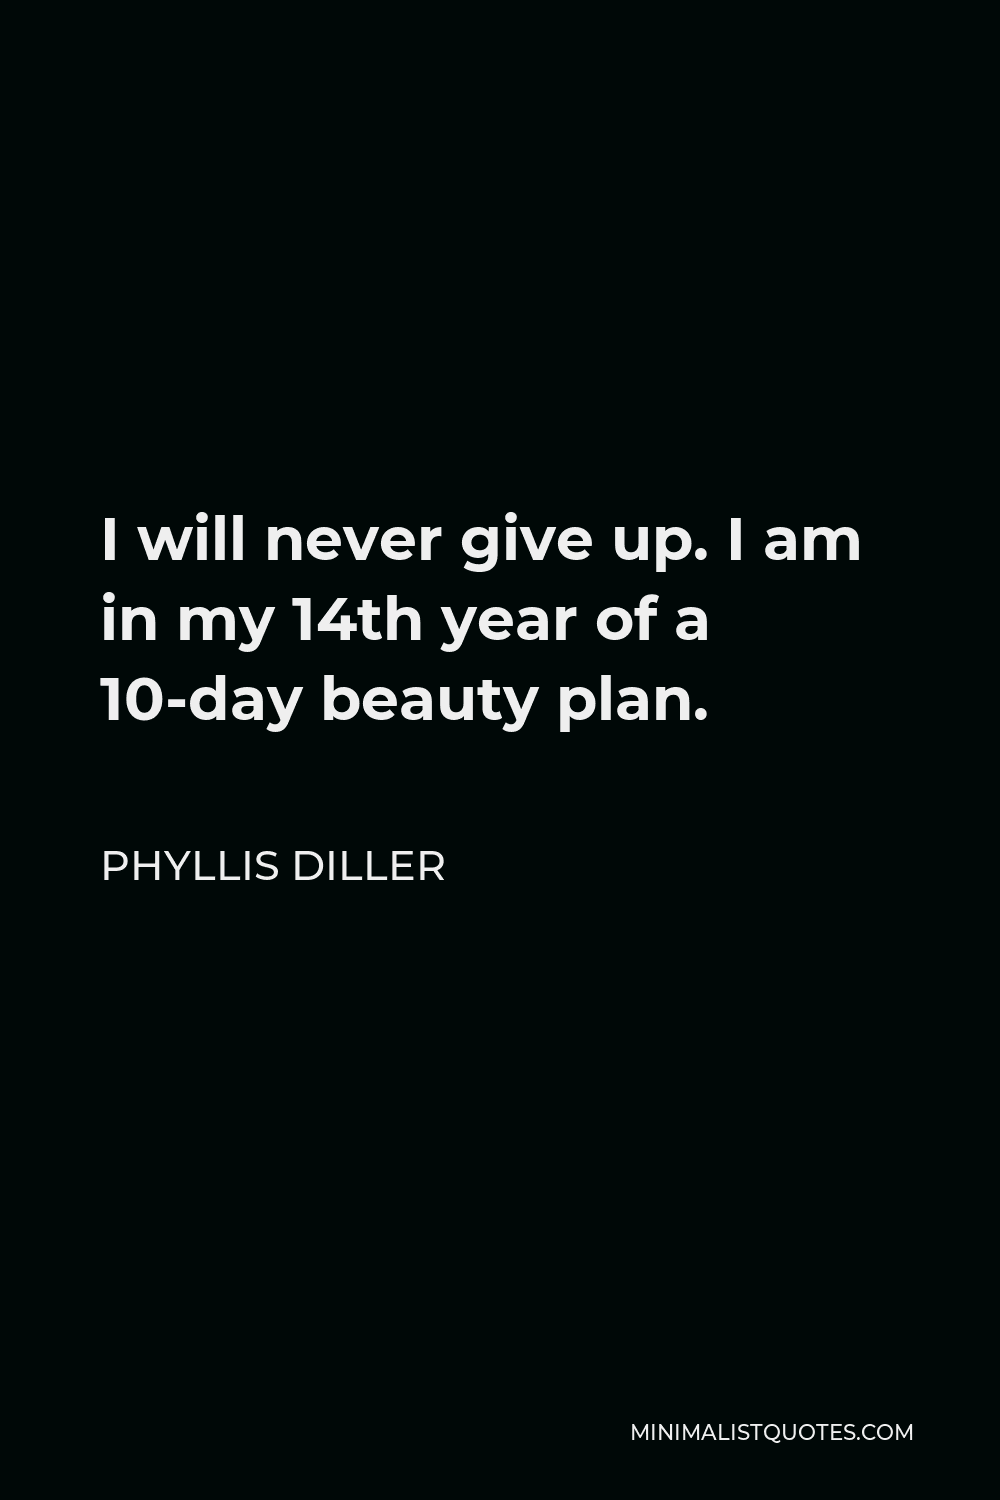 Phyllis Diller Quote - I will never give up. I am in my 14th year of a 10-day beauty plan.